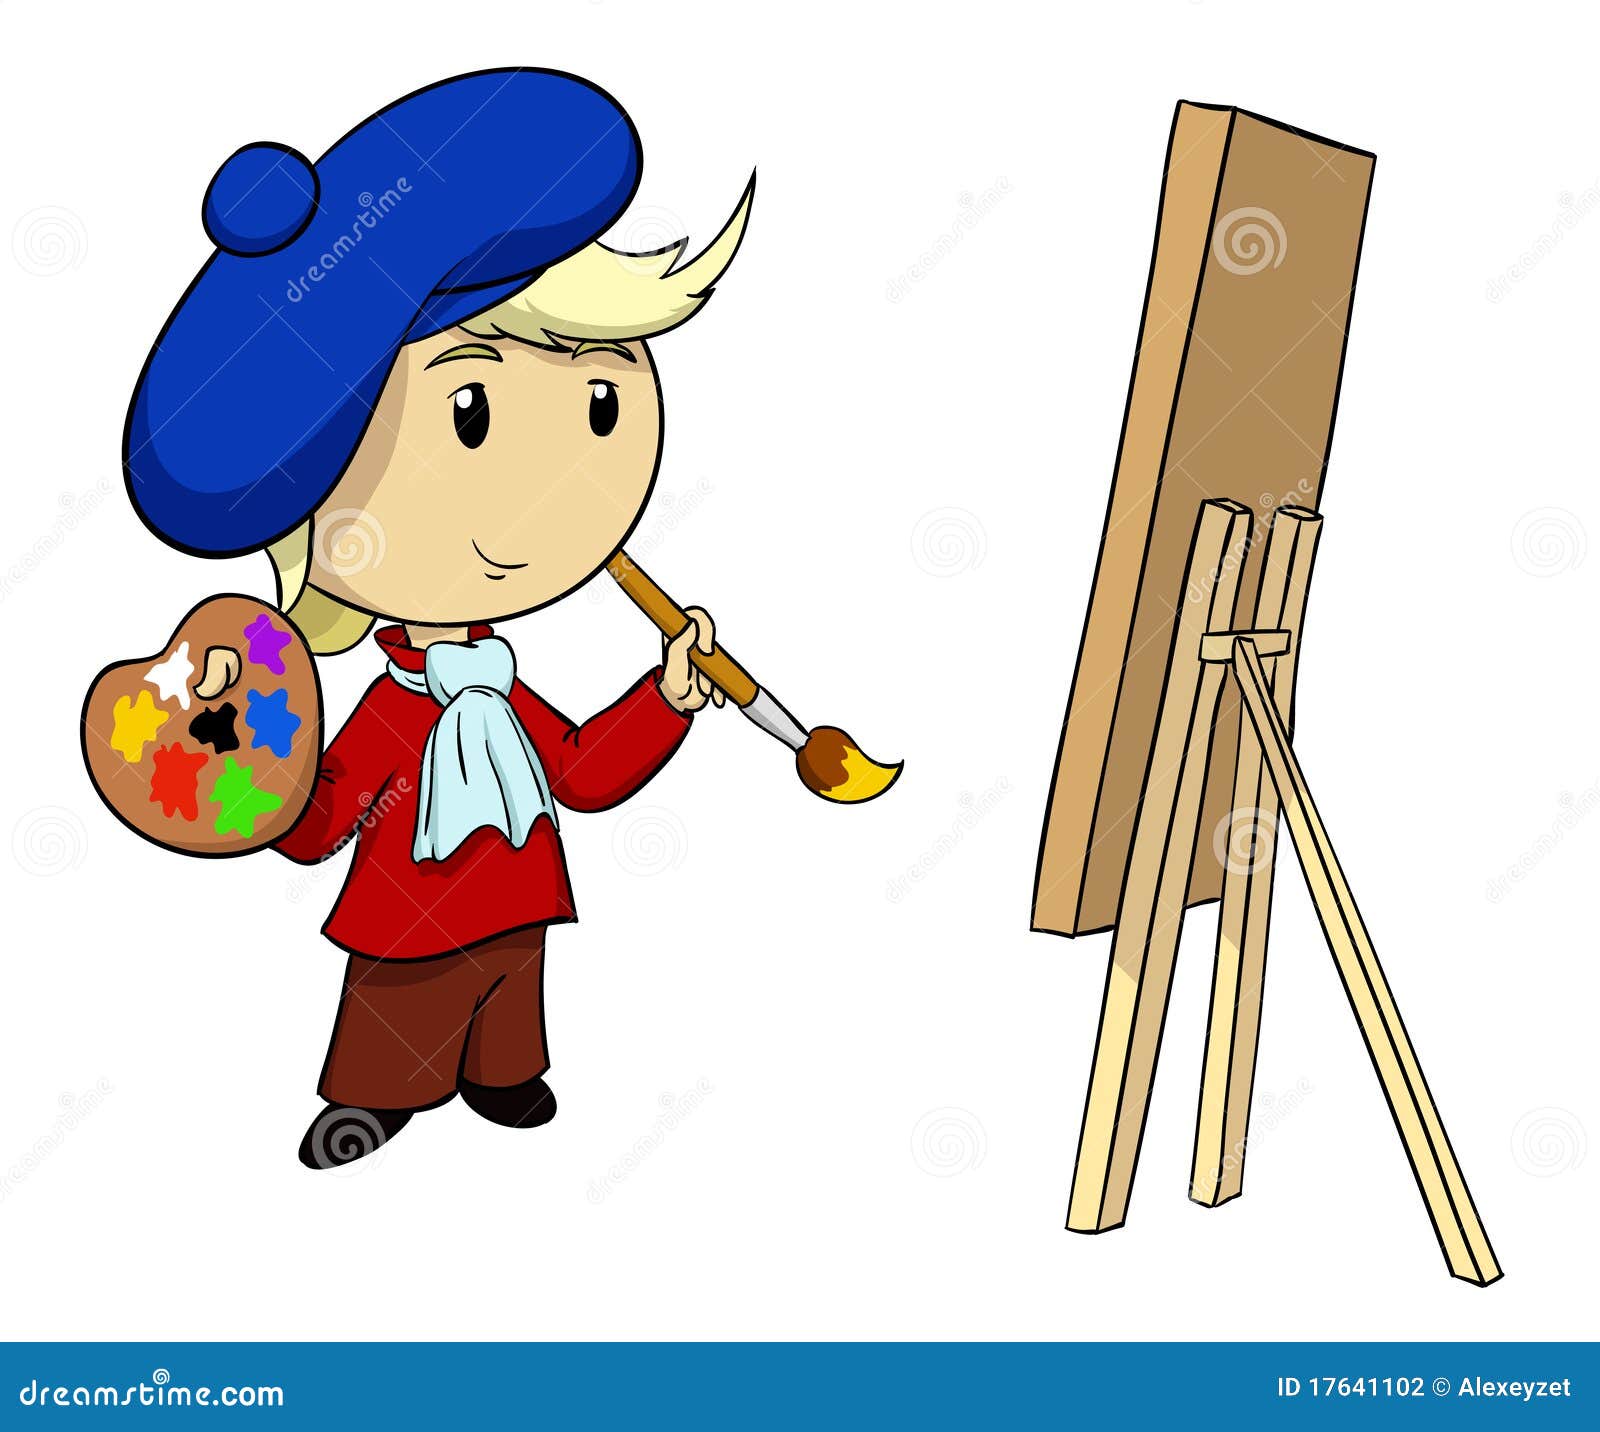 Cartoon Artist with Palette and Brush Stock Vector - Illustration of